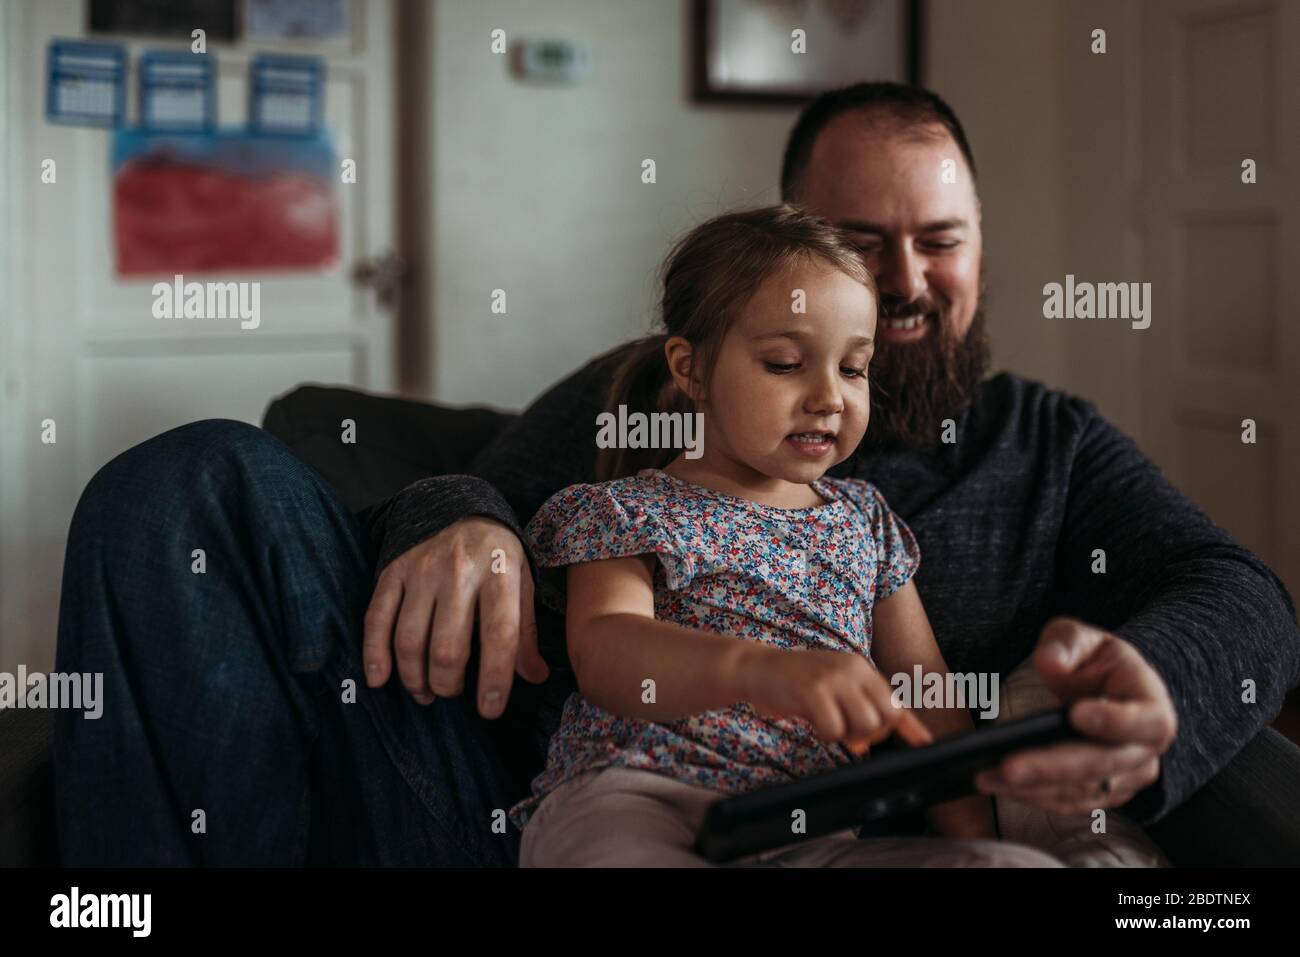 Close up of dad and young daughter playing on tablet during isolation Stock Photo